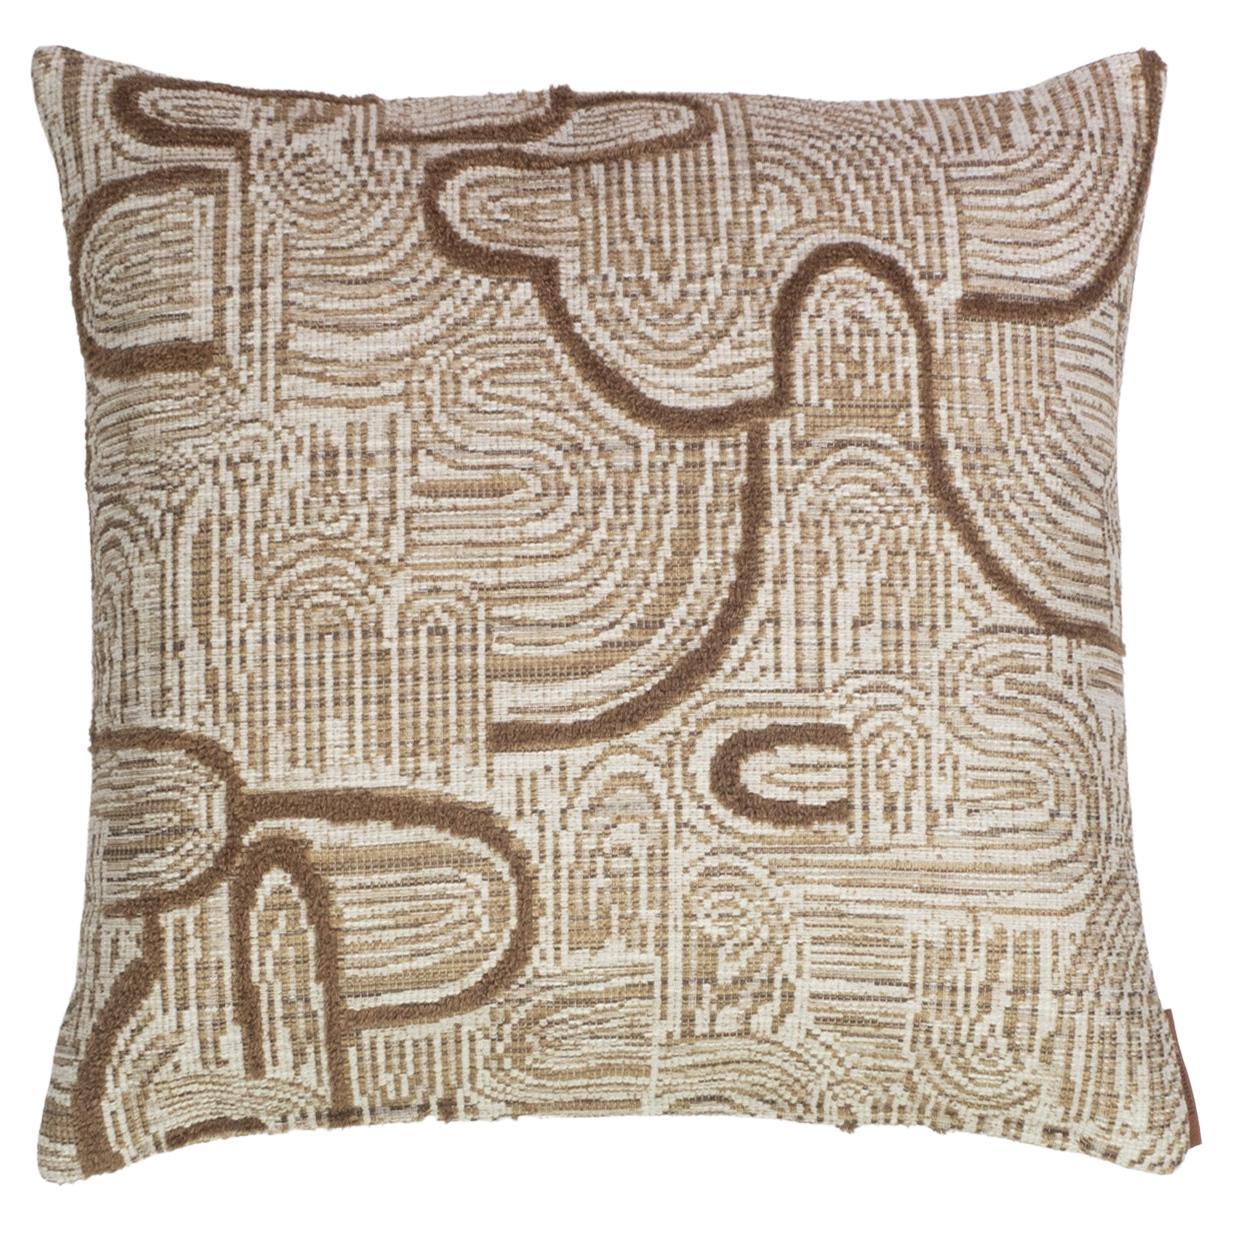 Modern Throw Patterned Pillow Camel Brown "Amsterdam" by Evolution21 For Sale